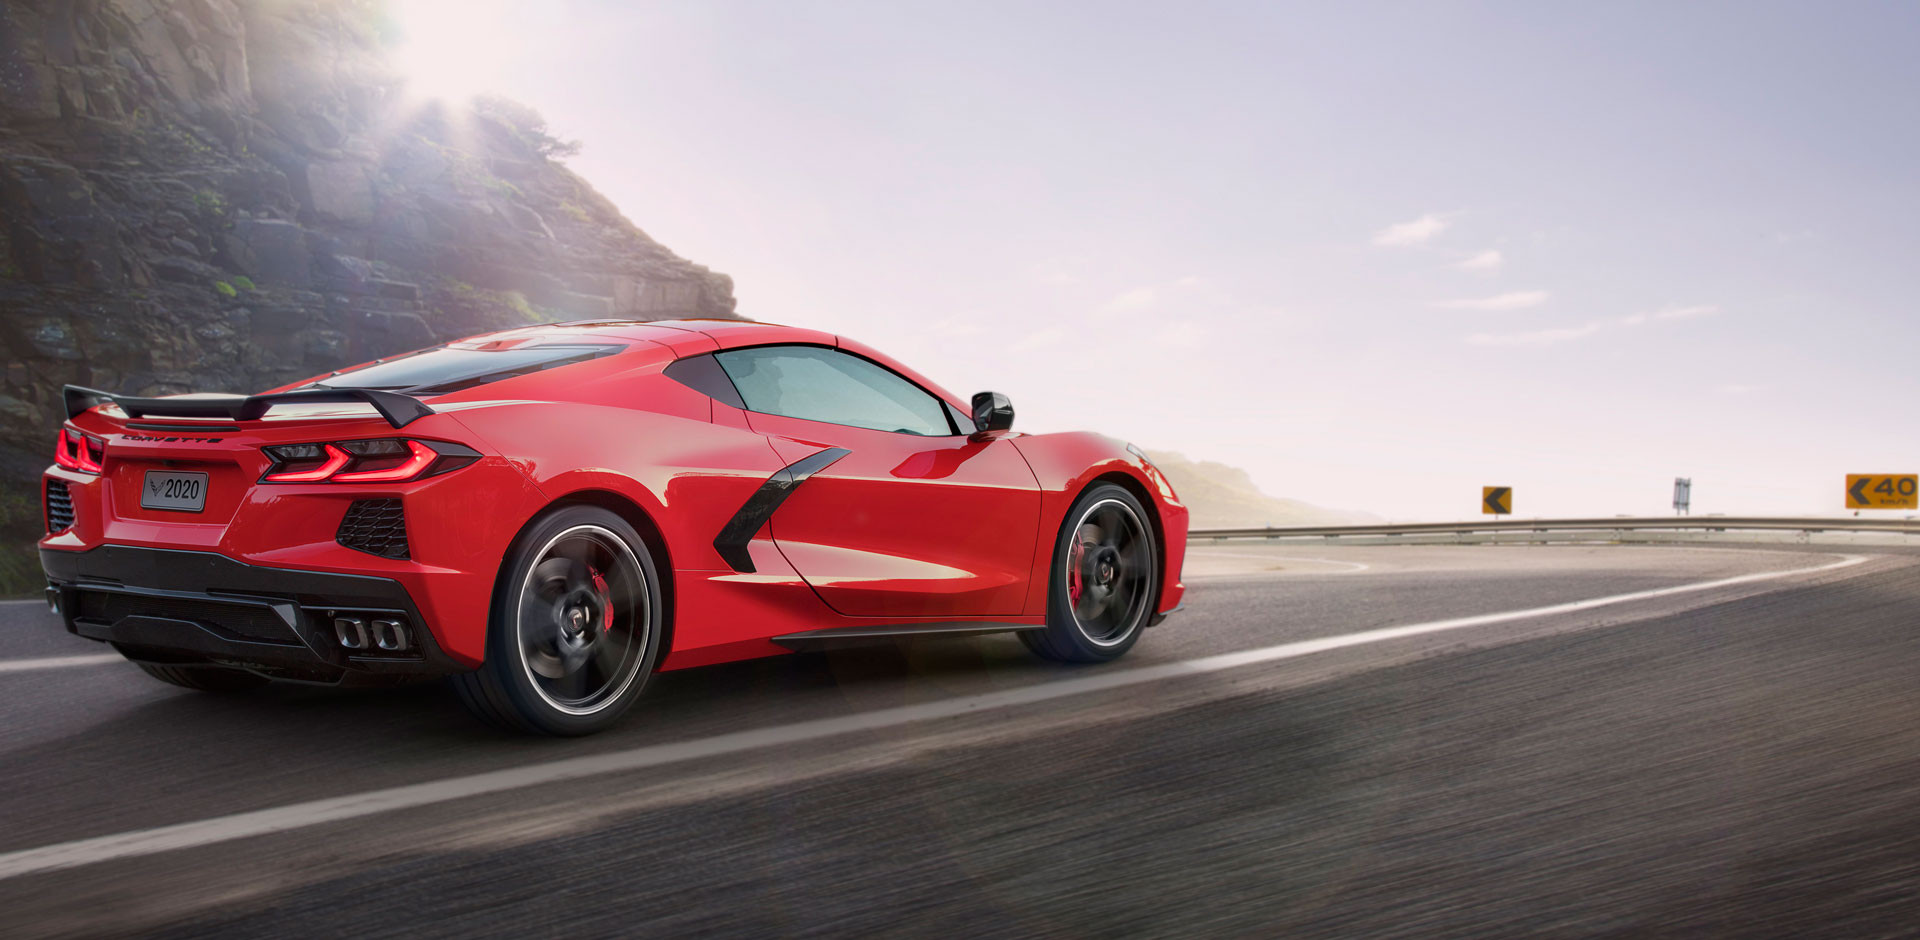 2020 Chevy Corvette on the road